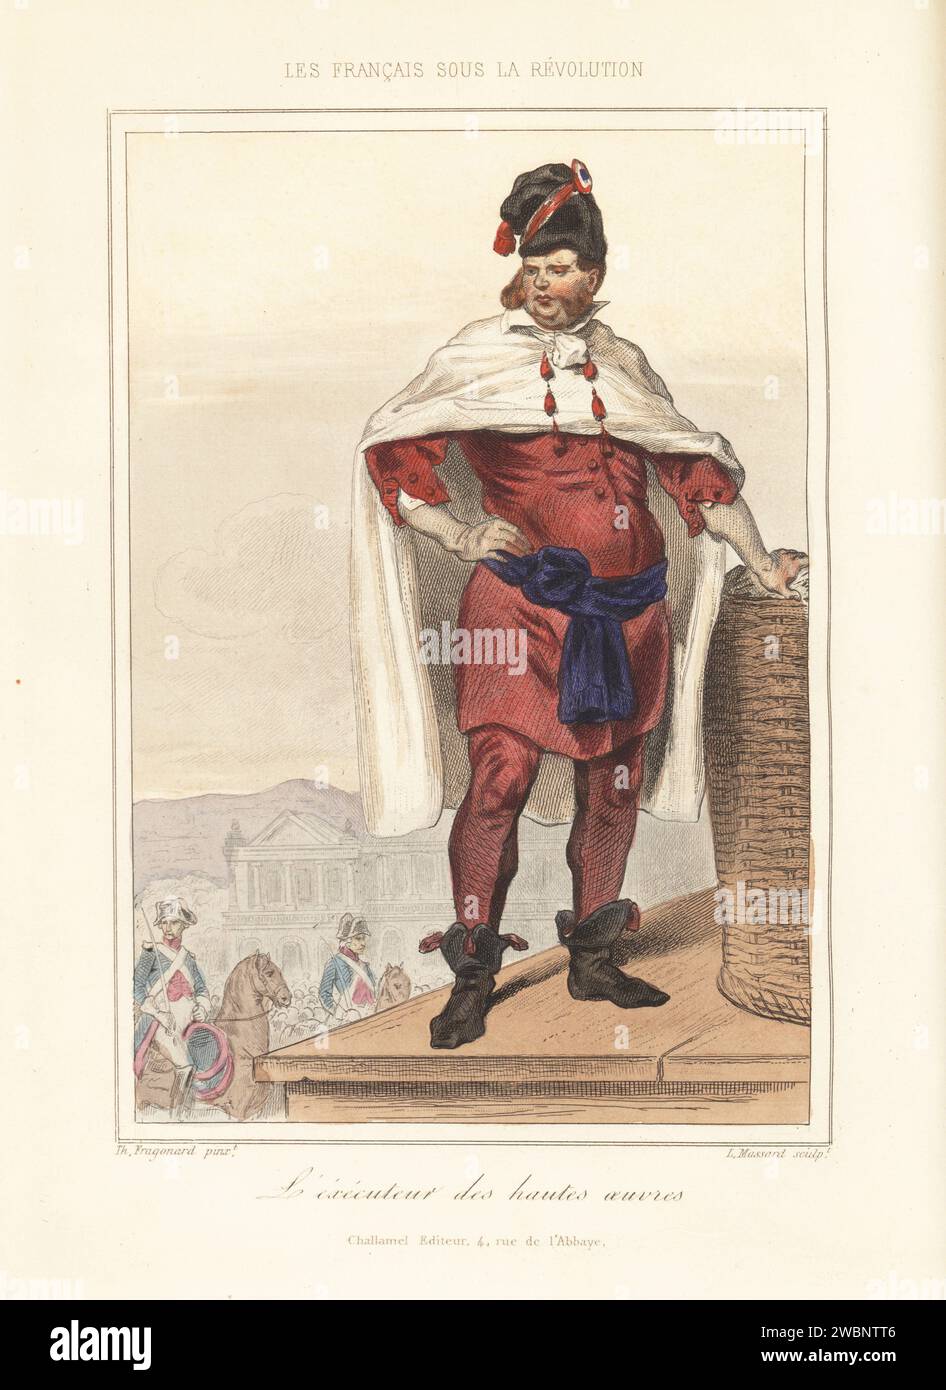 Charles-Henri Sanson, executioner or bourreau during the reign of King Louis XVI and the Reign of Terror, 1739-1806. Standing next to a basket on the scaffold. In hat with tricolor cockade, white cape and red coat and hose, blue sash. L'executeur des hautes oeuvres. Handcoloured steel engraving by Leopold Massard after an illustration by Theophile Fragonard from Augustin Challamel and Wilhelm Tenint’s Les Francais sous la Revolution, The French under the Revolution, Challamel, Paris, 1843. Stock Photo